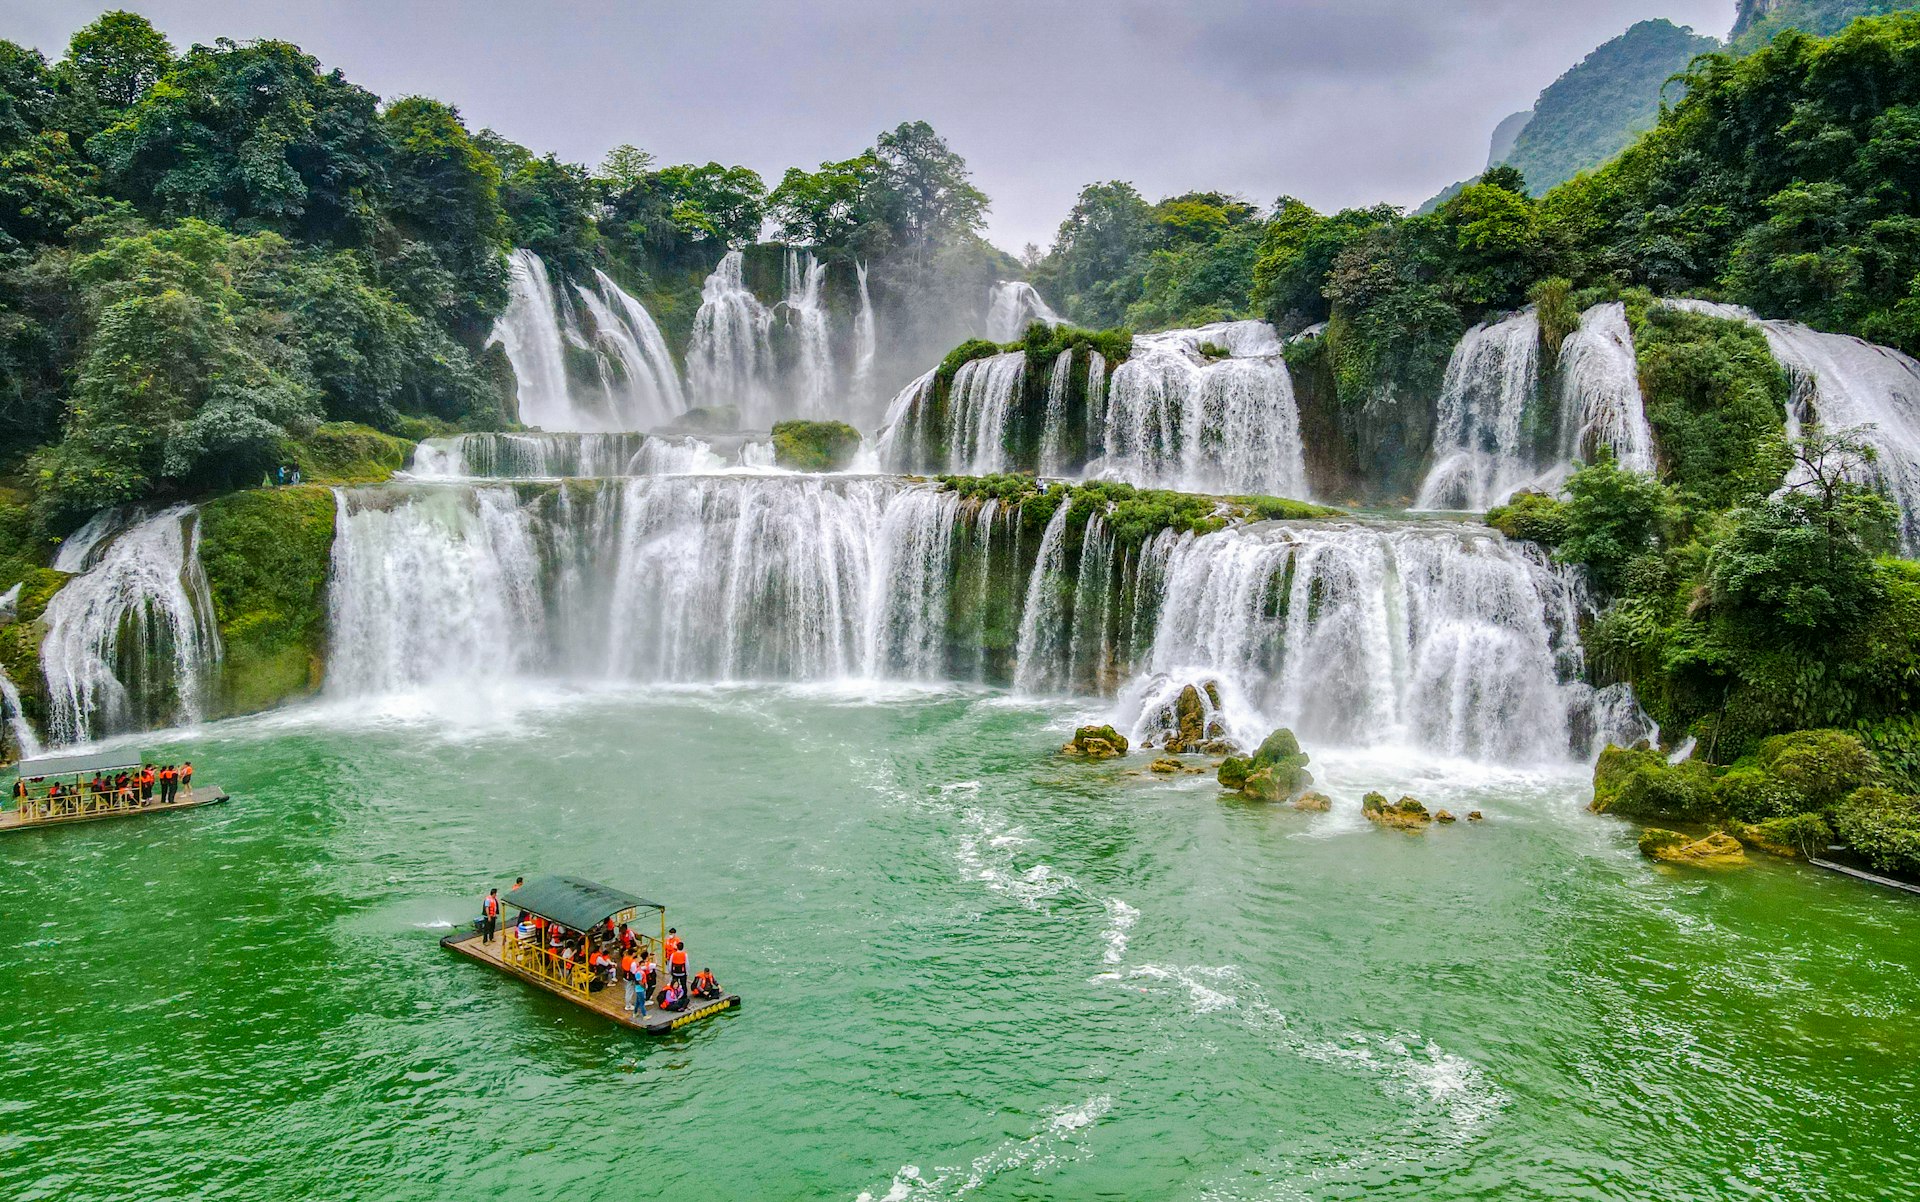 A many tiered waterfall with a bamboo raft full of tourists in the pool